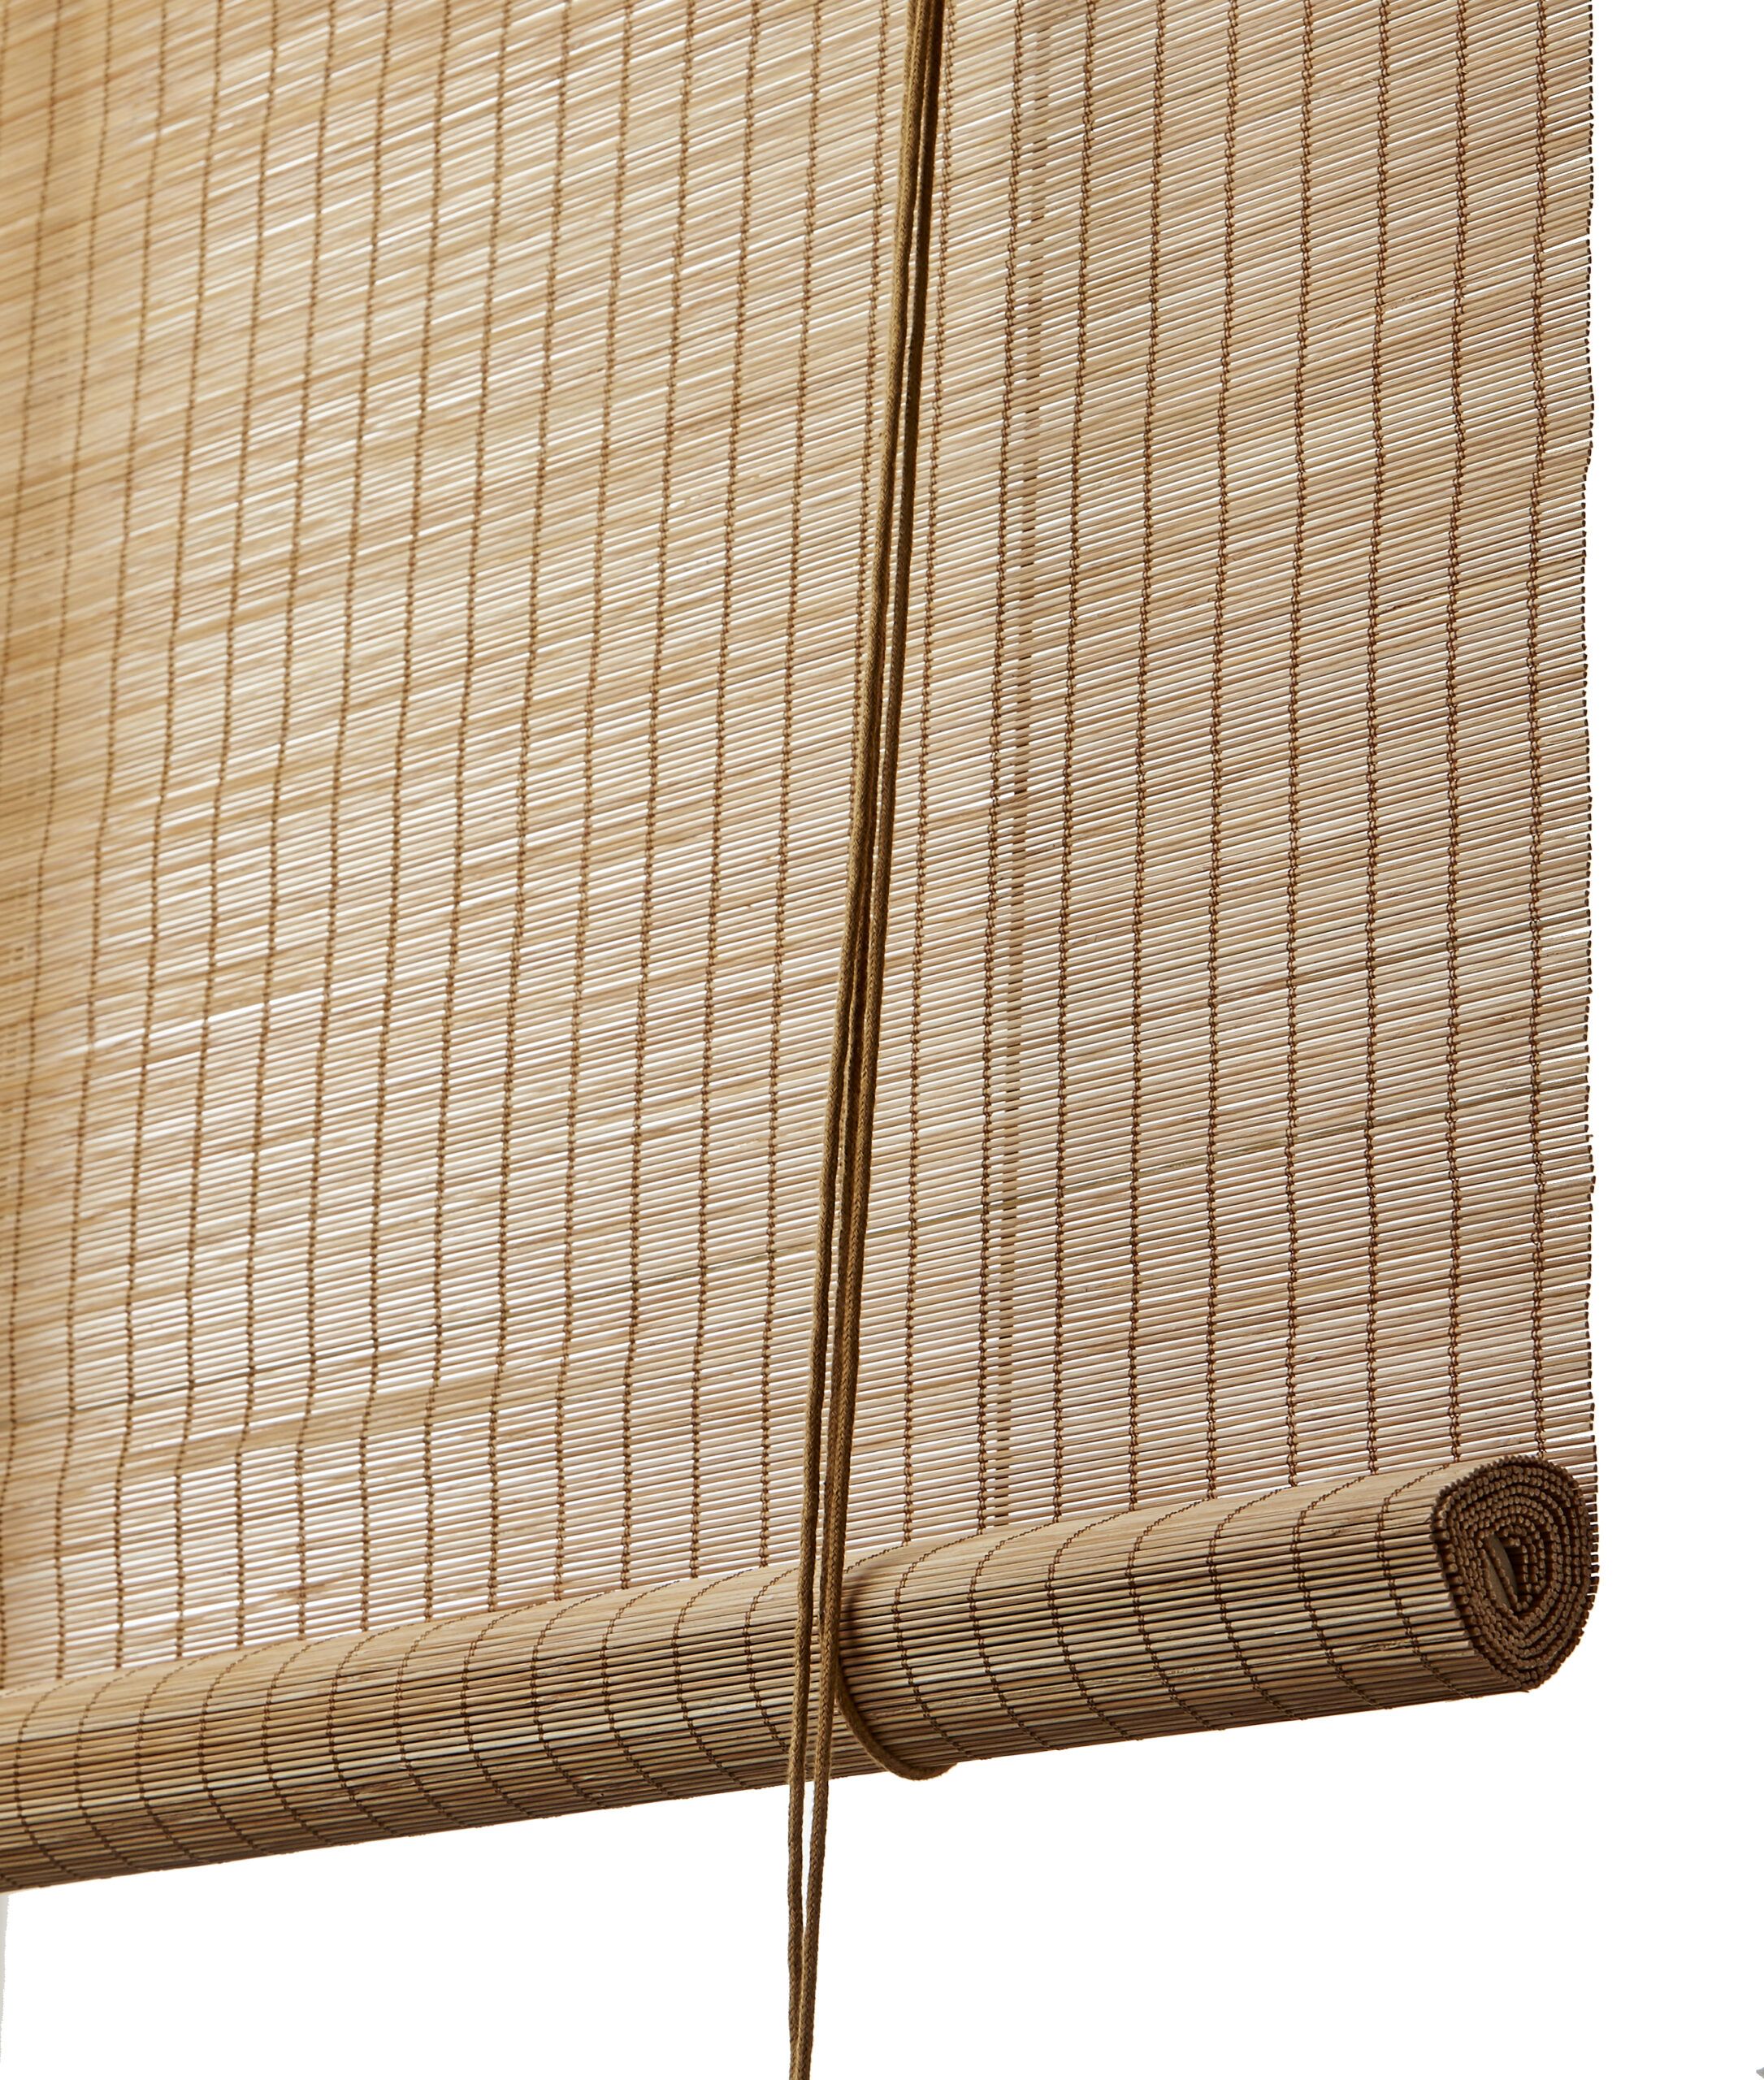 Why Bamboo Blinds Are the Eco-Friendly
Choice for Your Home